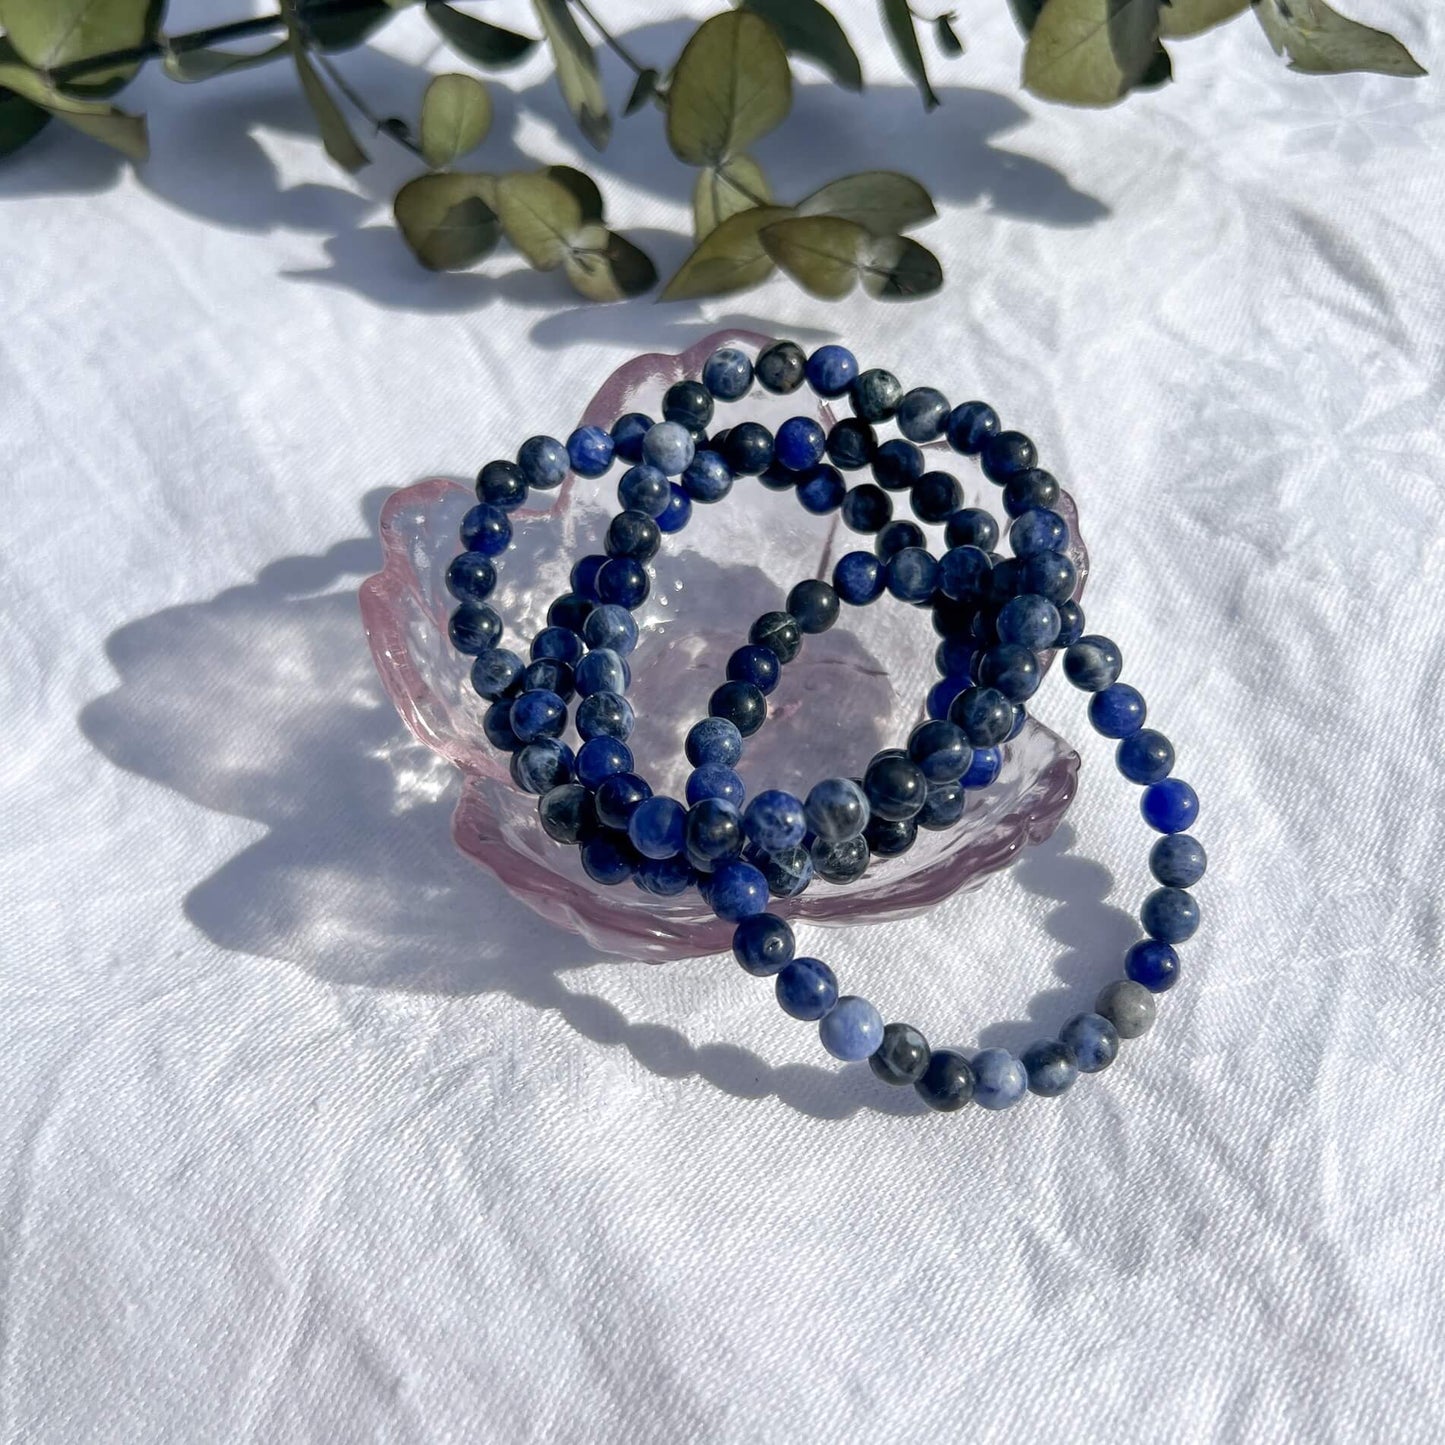 Glass trinket dish filled with blue and white Sodalite crystal bead bracelets